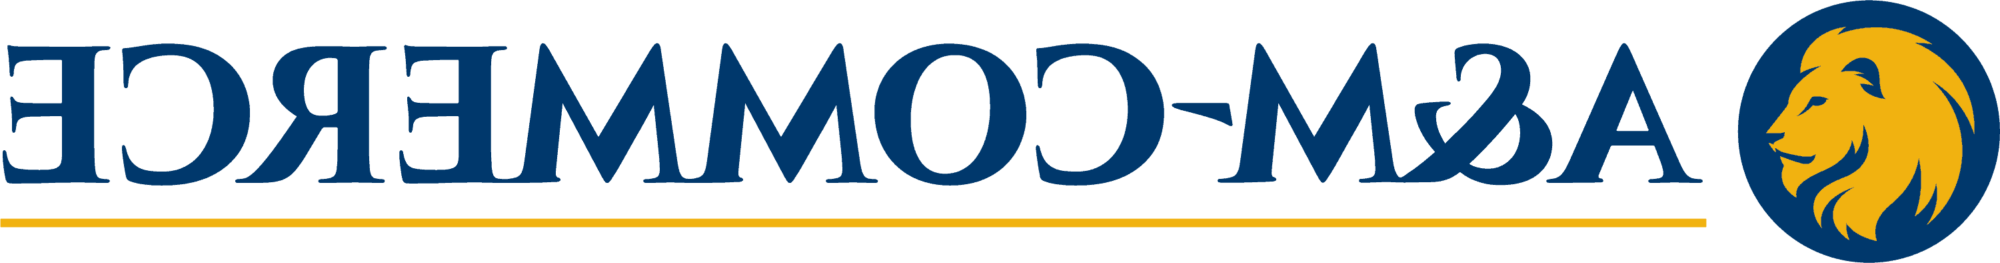 One line A&M-Commerce logo on light background.